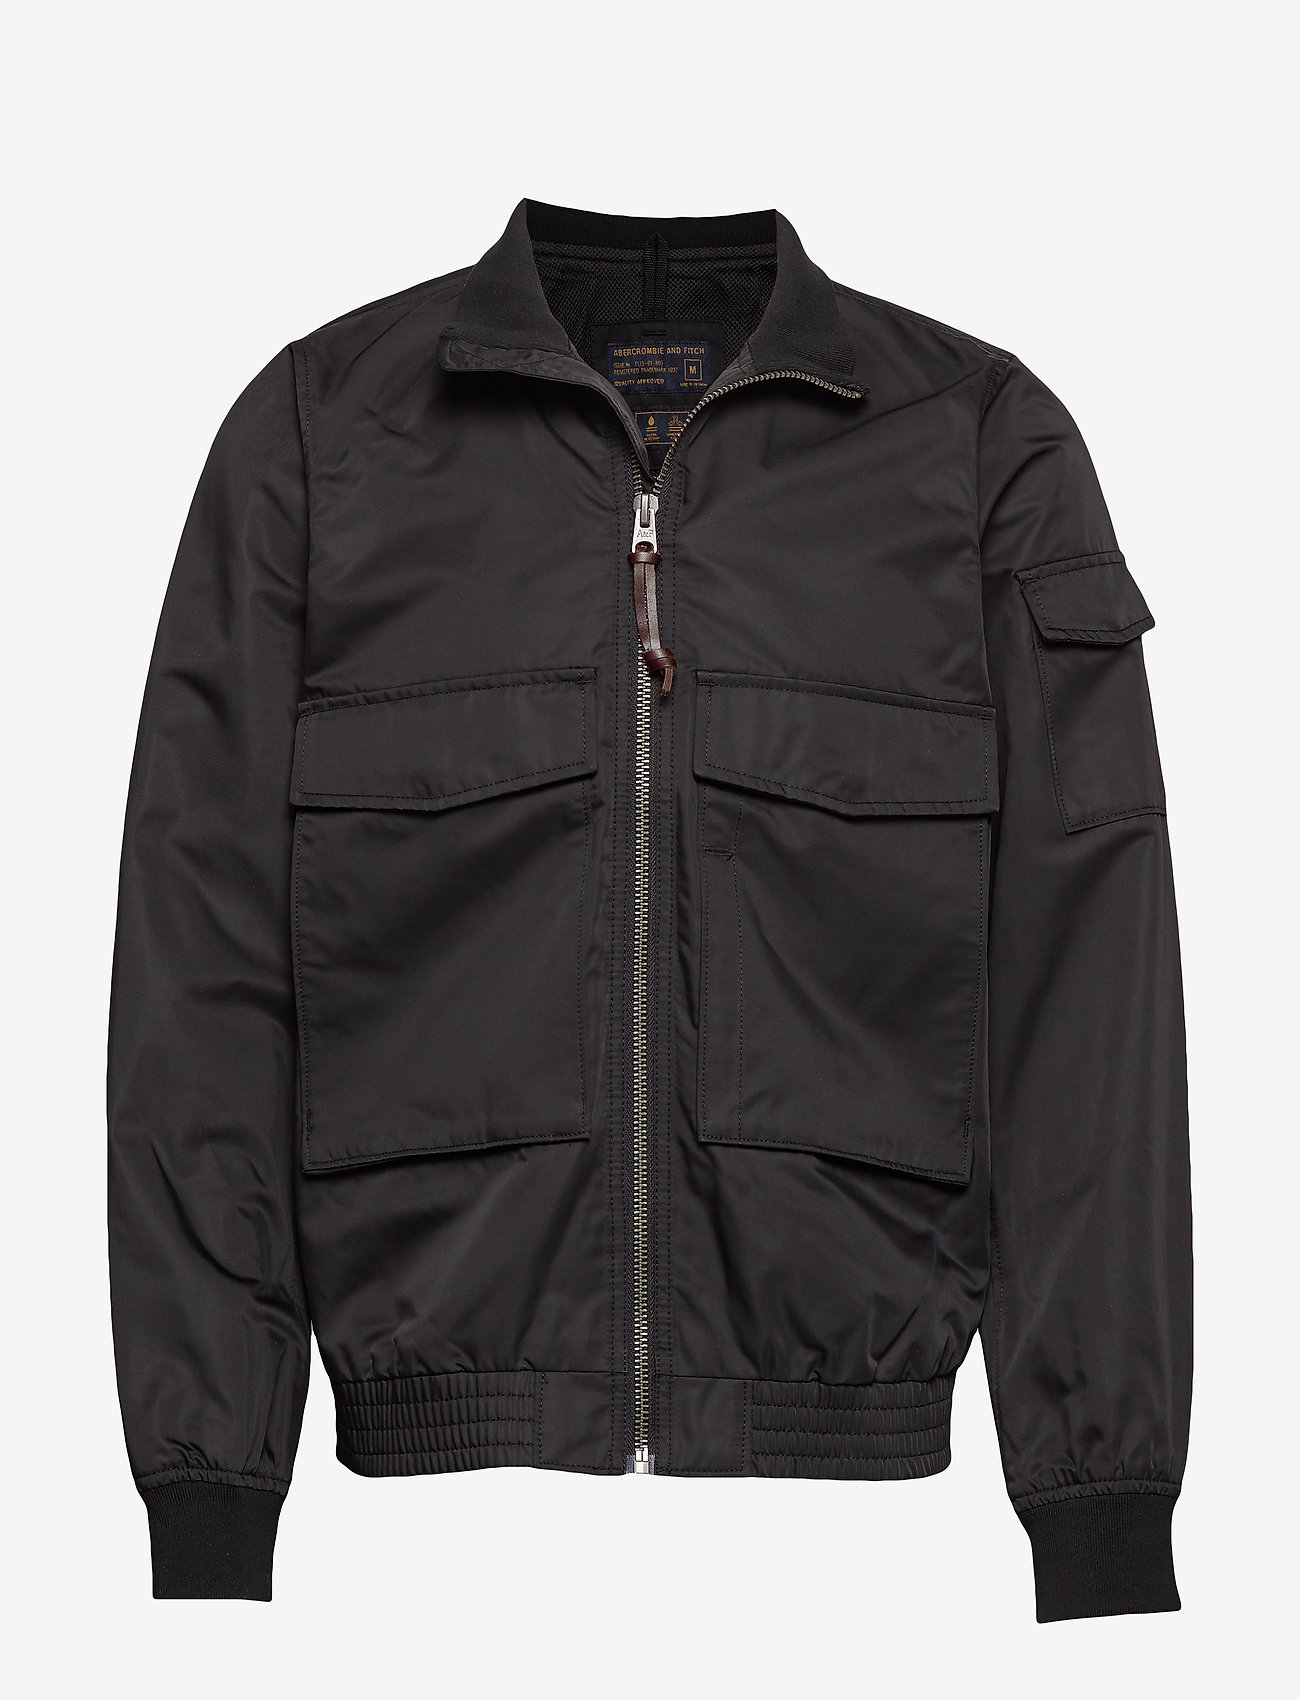 abercrombie and fitch bomber jacket